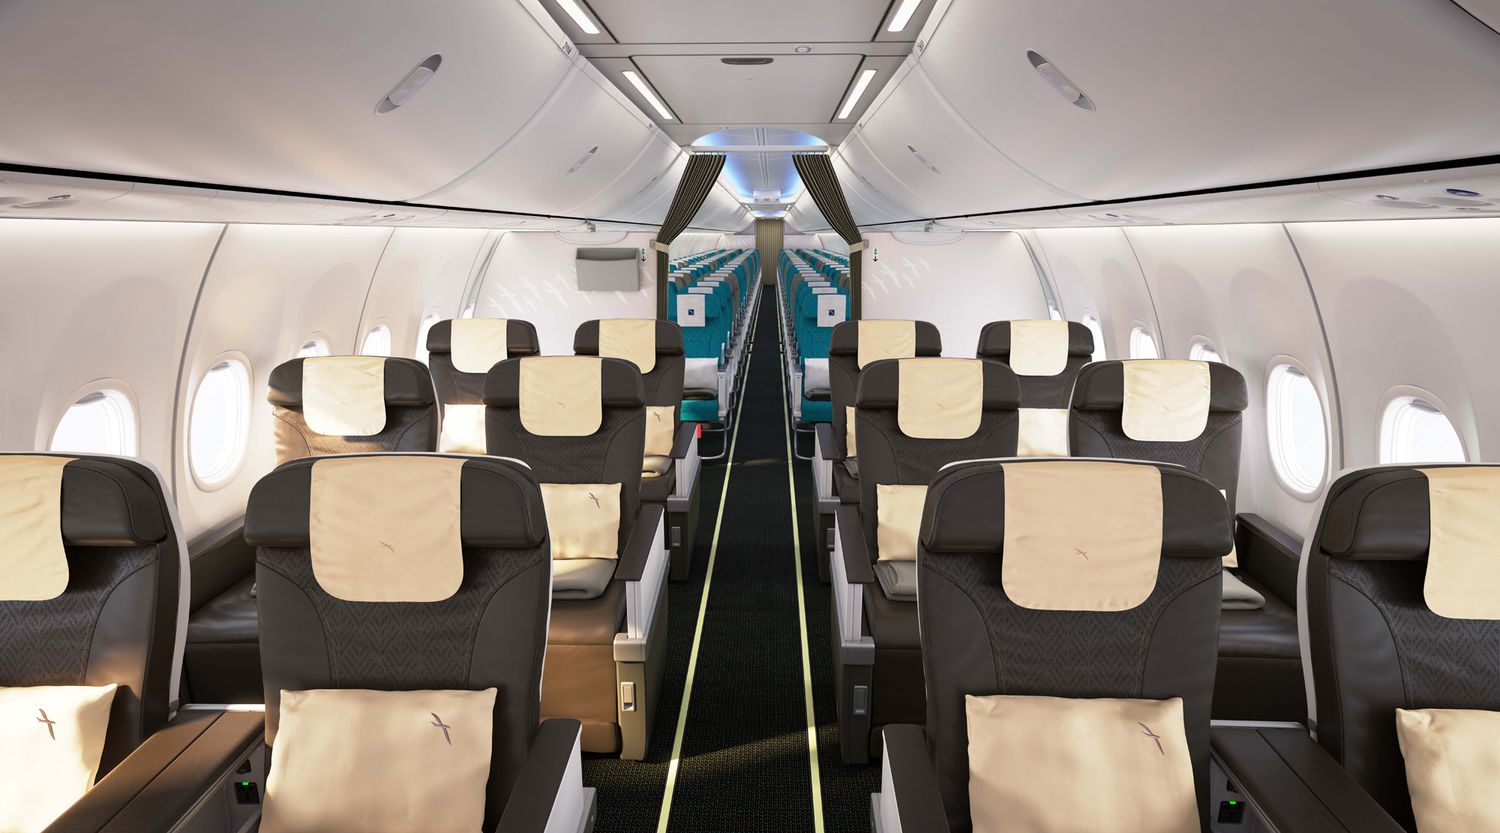 SilkAir's Boeing 737 MAX 8 jets have 12 business class seats up front, and 144 seats in the economy cabin.